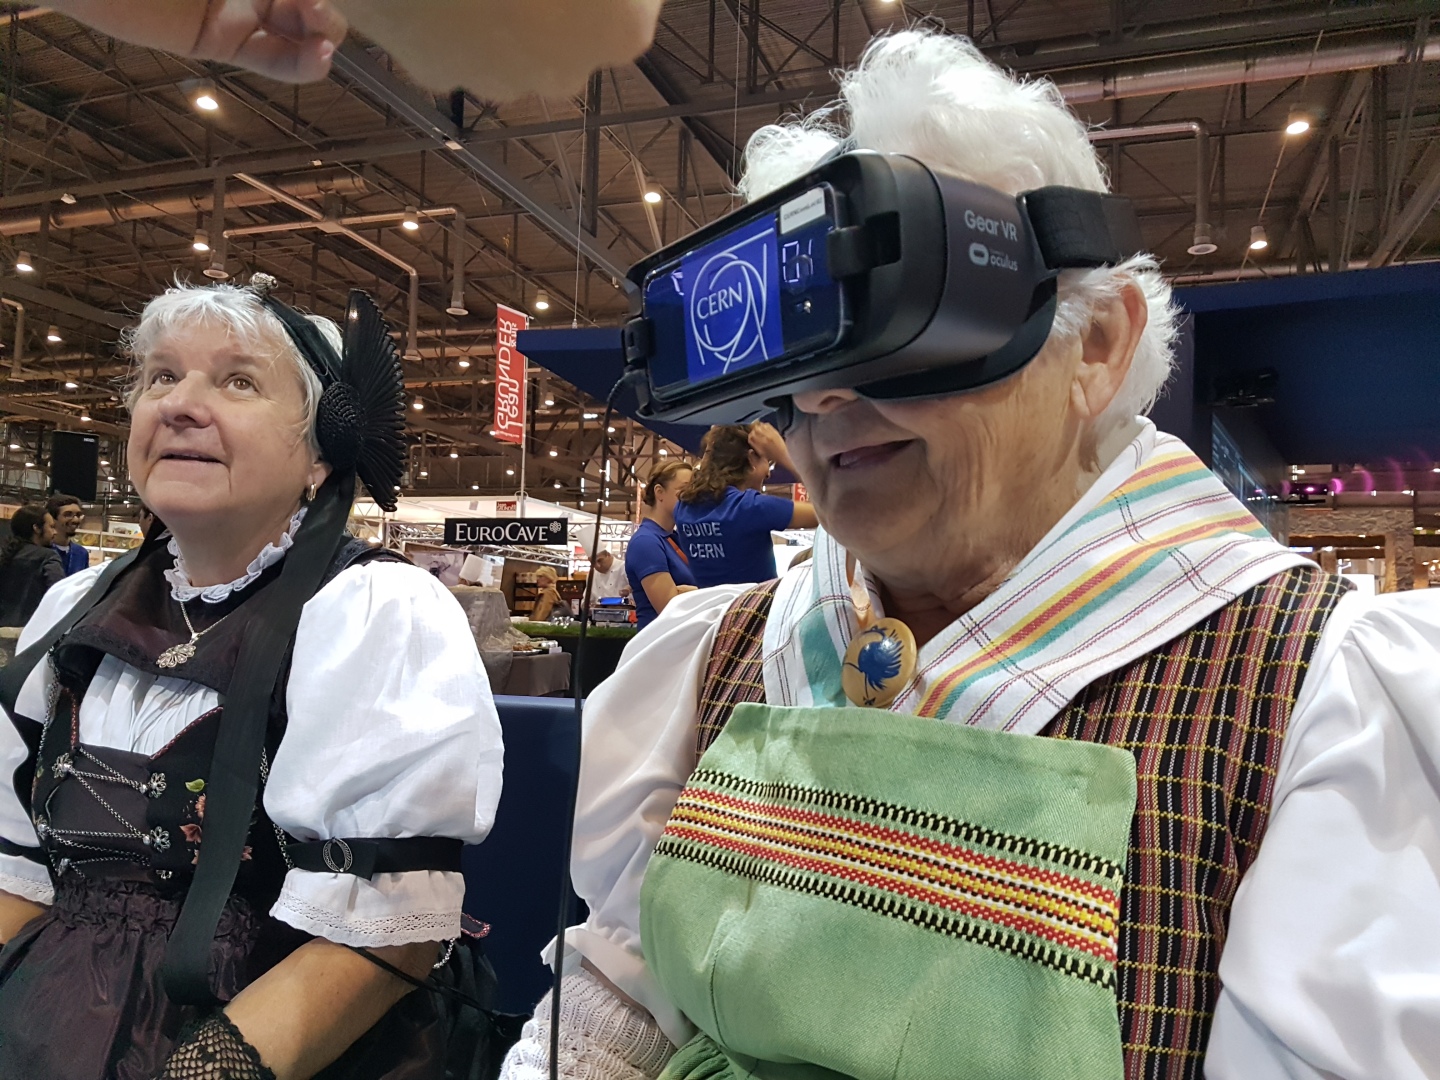  Geneva Yodelers, in traditional costume, took a futuristic virtual reality trip into the LHC and the CMS experiment.